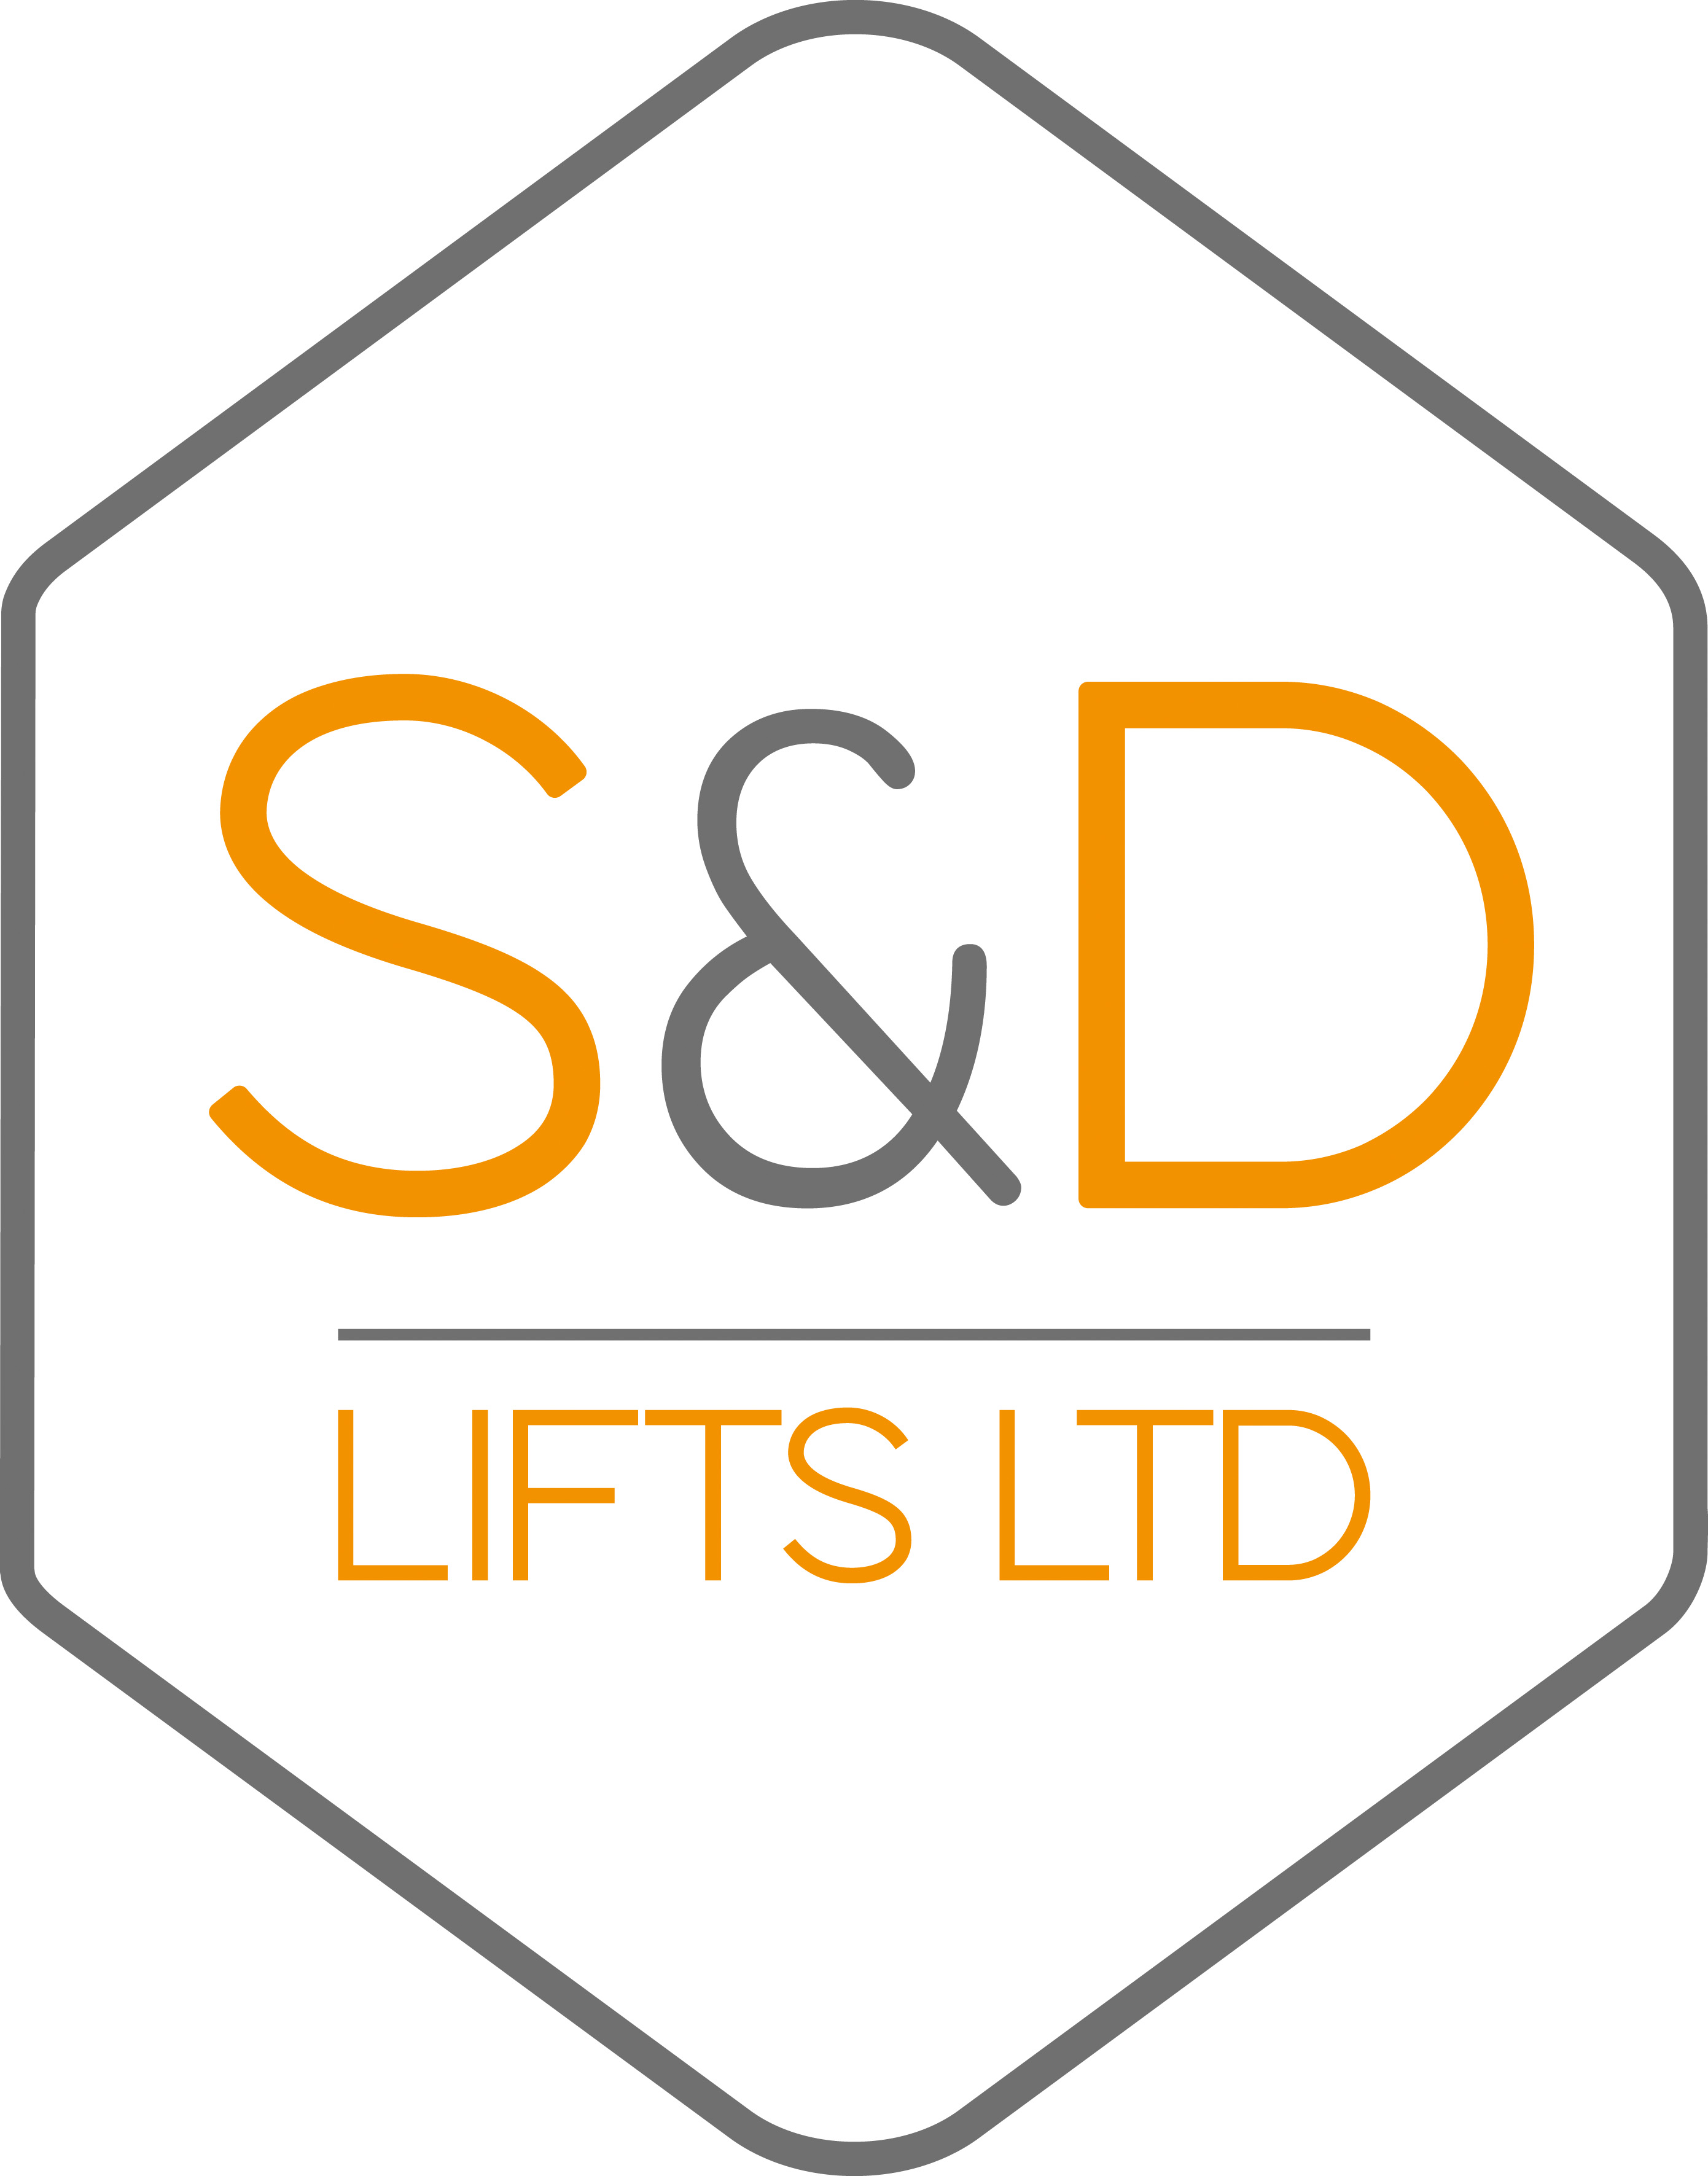 Service & Disabled Lifts